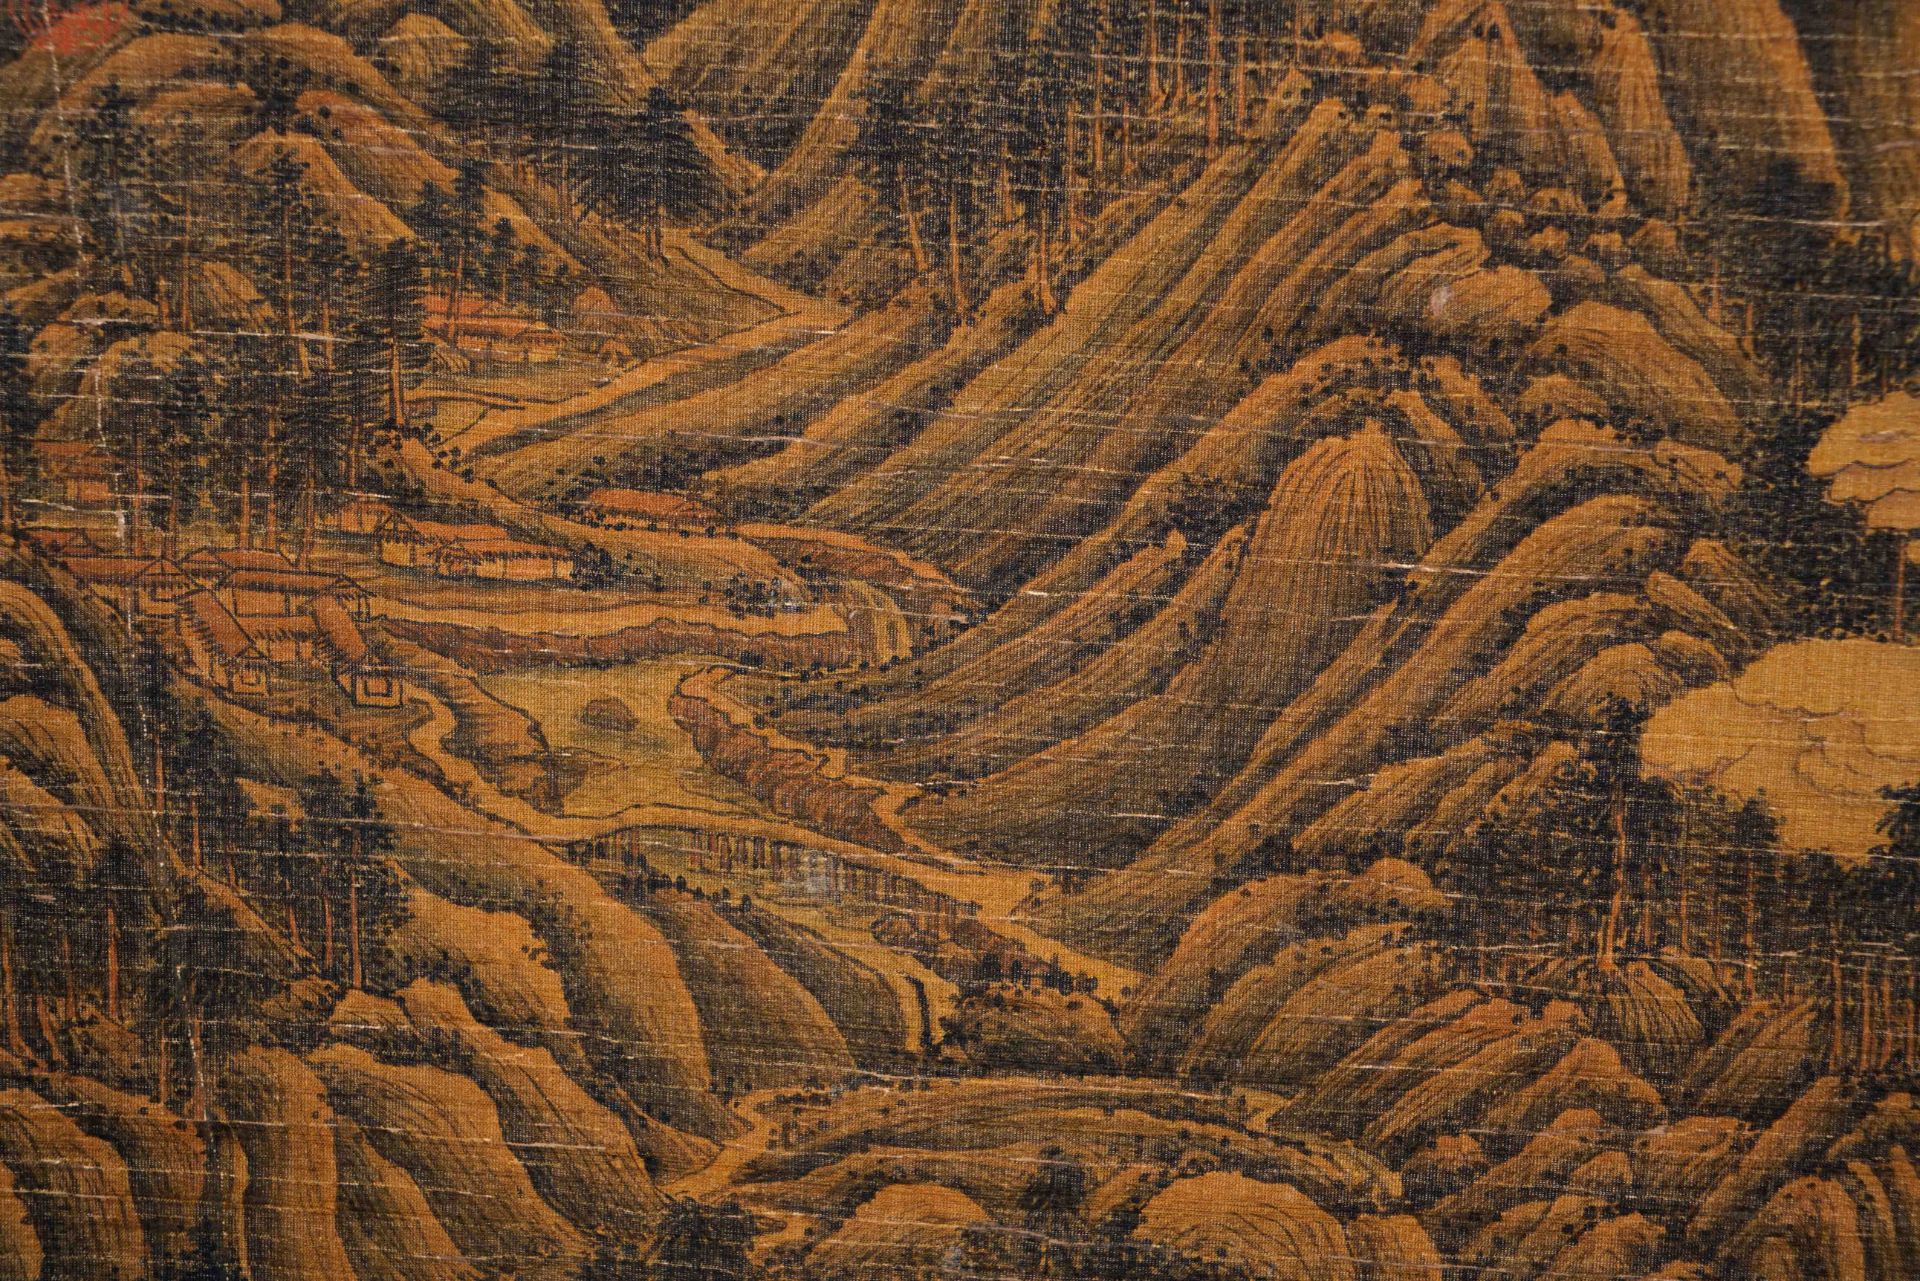 A Chinese Scroll Painting By Dong Yuan - Image 7 of 12